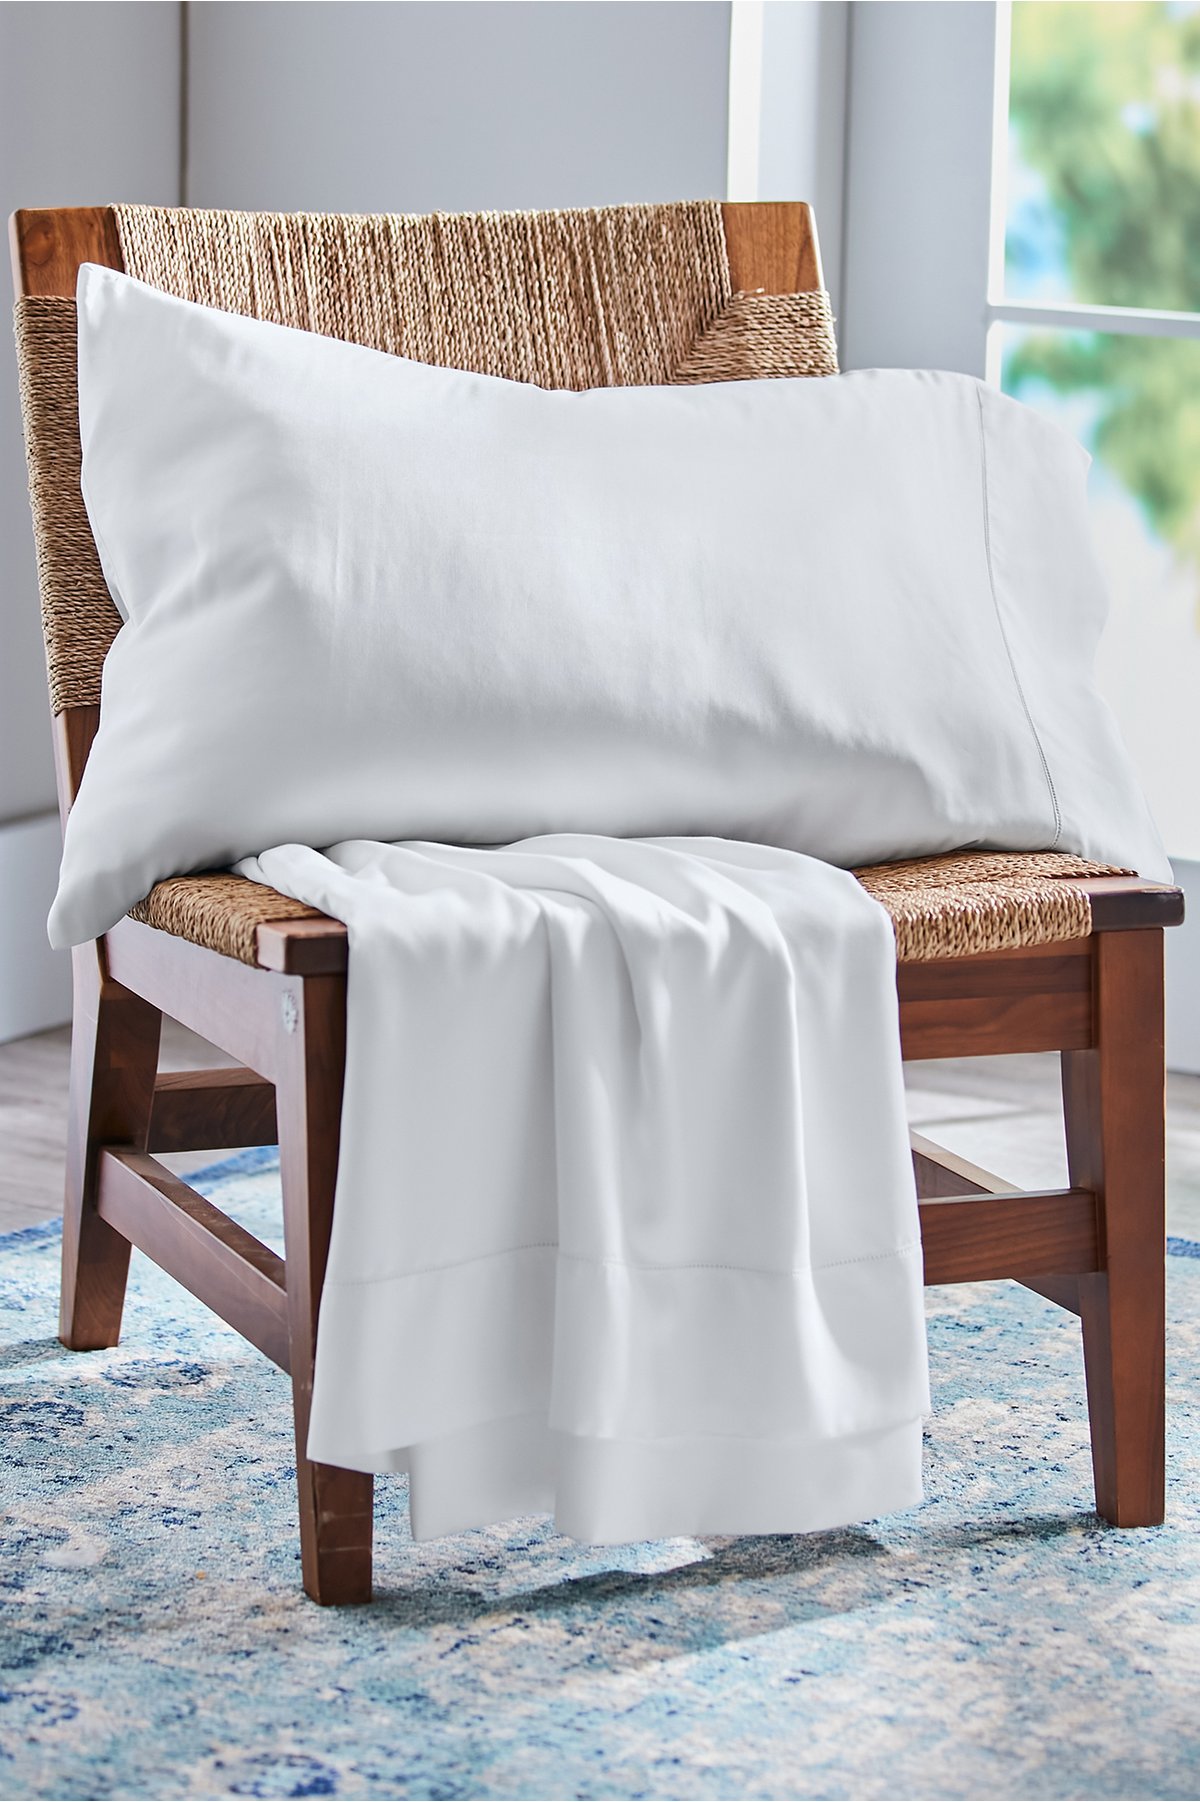 Blissful Bamboo Sheet Set by Soft Surroundings, in...